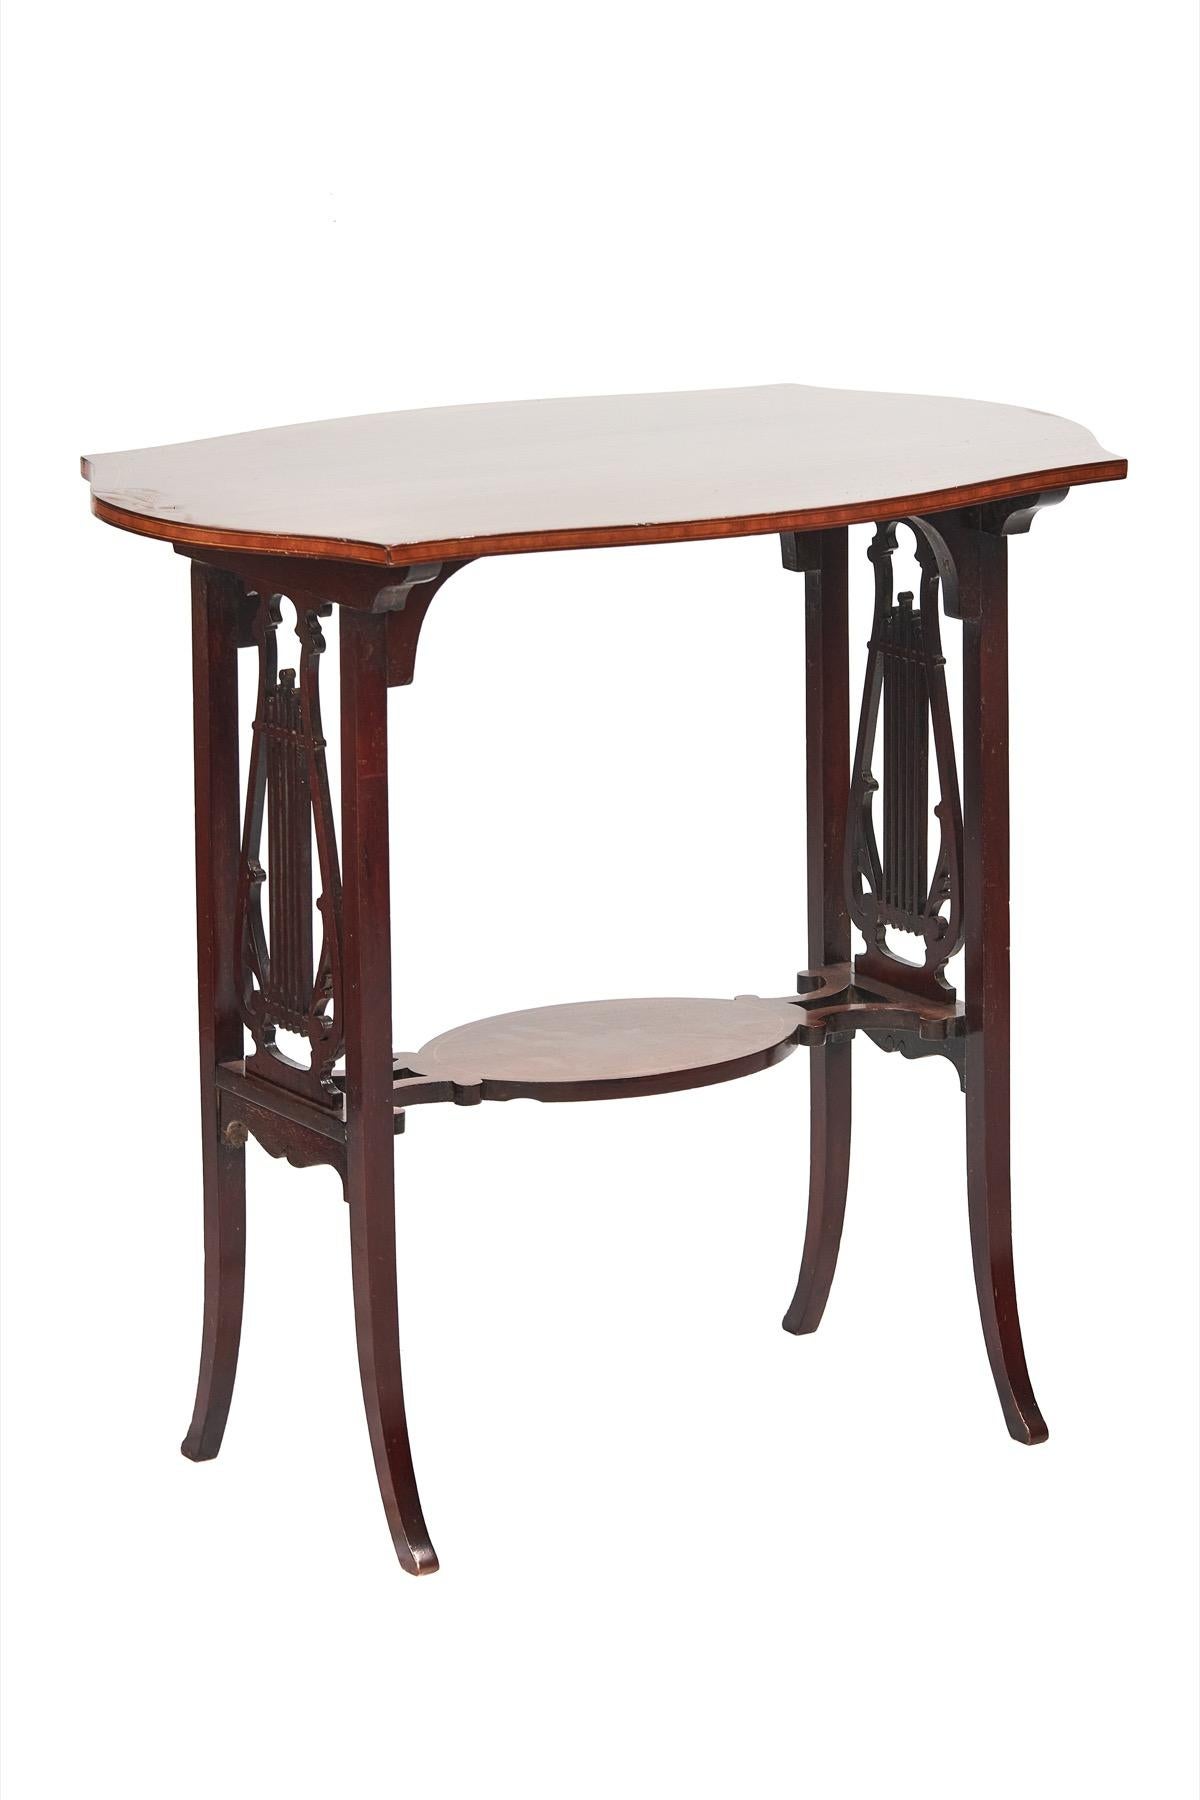 Fine Sheraton Revival Mahogany Inlaid & carved Lyre end support table
Circa 1900,
Shaped Rectangular top with Boxwood line inlay, Satinwood Banded inlay around edge,
Oval Shaped under tier with boxwood line inlay,
End supports with Lyre shaped open